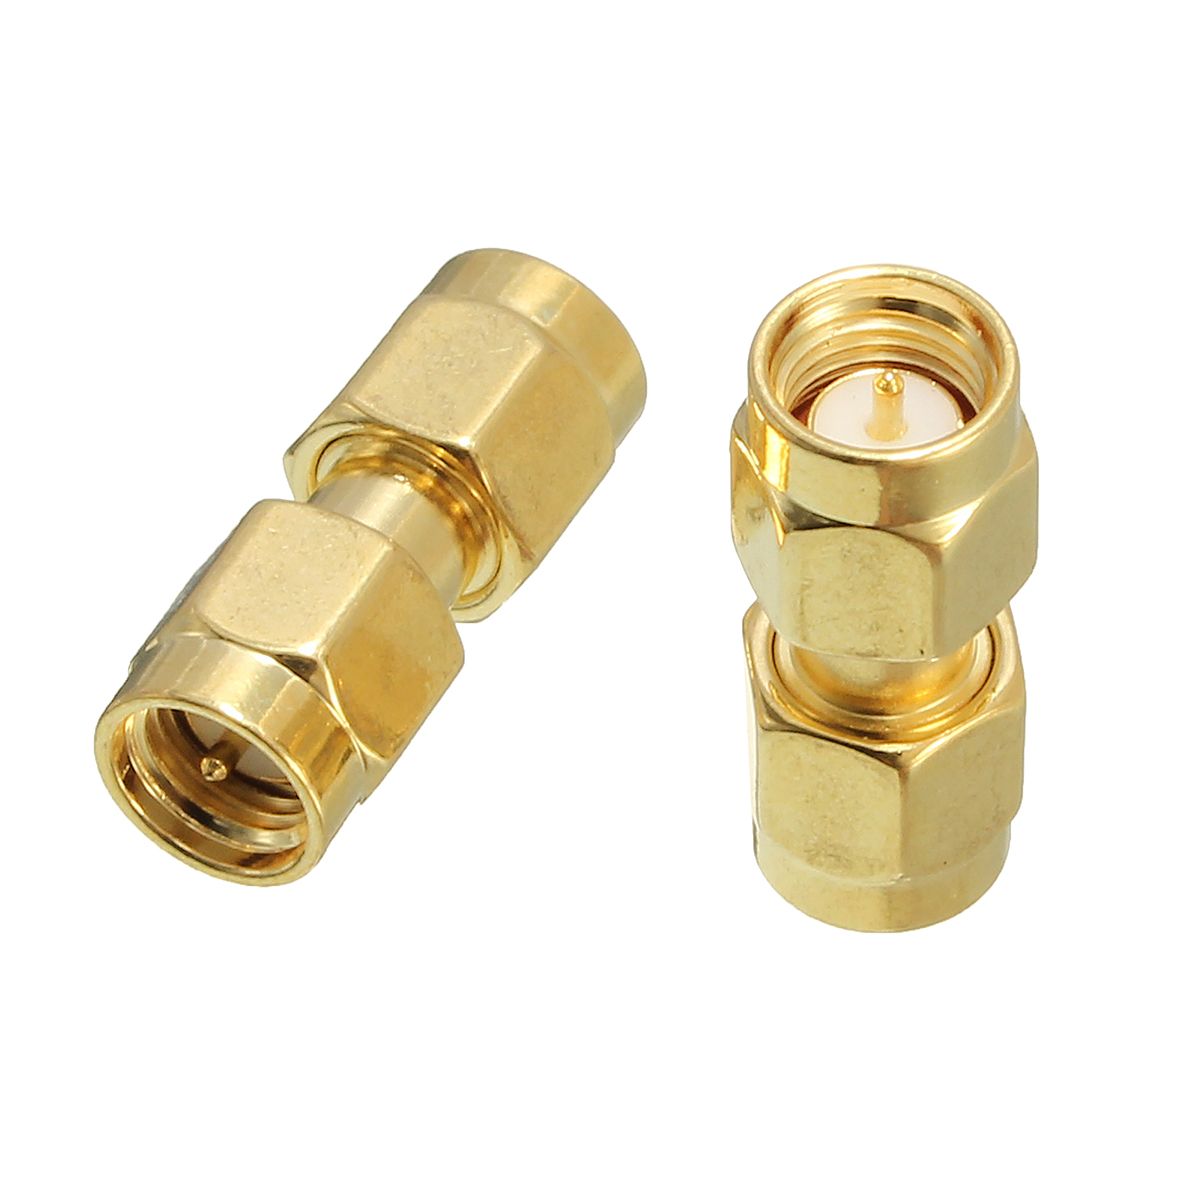 Excellwayreg-CA01-2Pcs-Copper-SMA-Male-To-SMA-Male-Plug-RF-Coaxial-Adapter-Connector-1073343